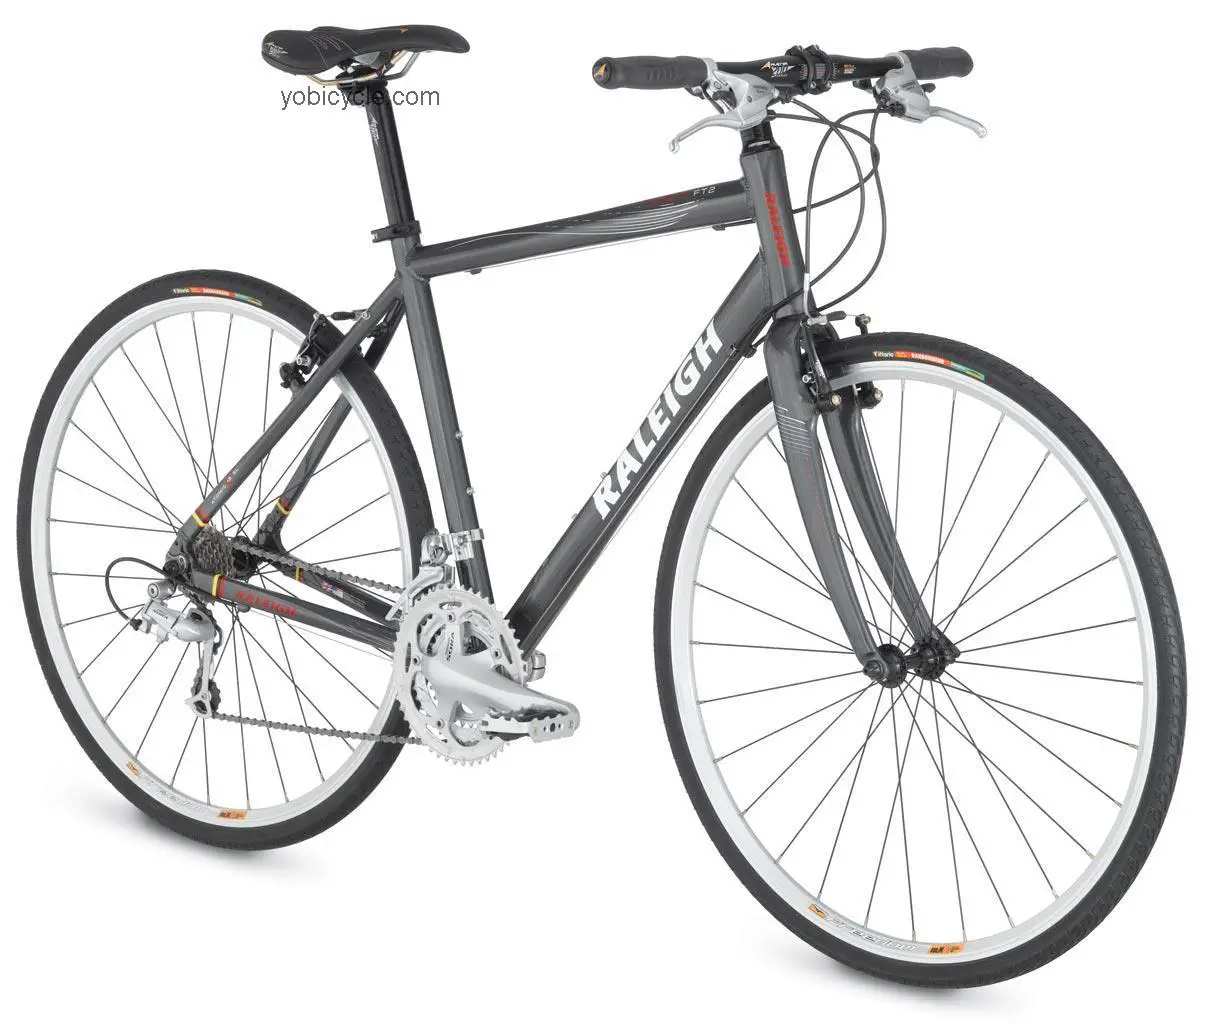 Raleigh Cadent FT2 2009 comparison online with competitors